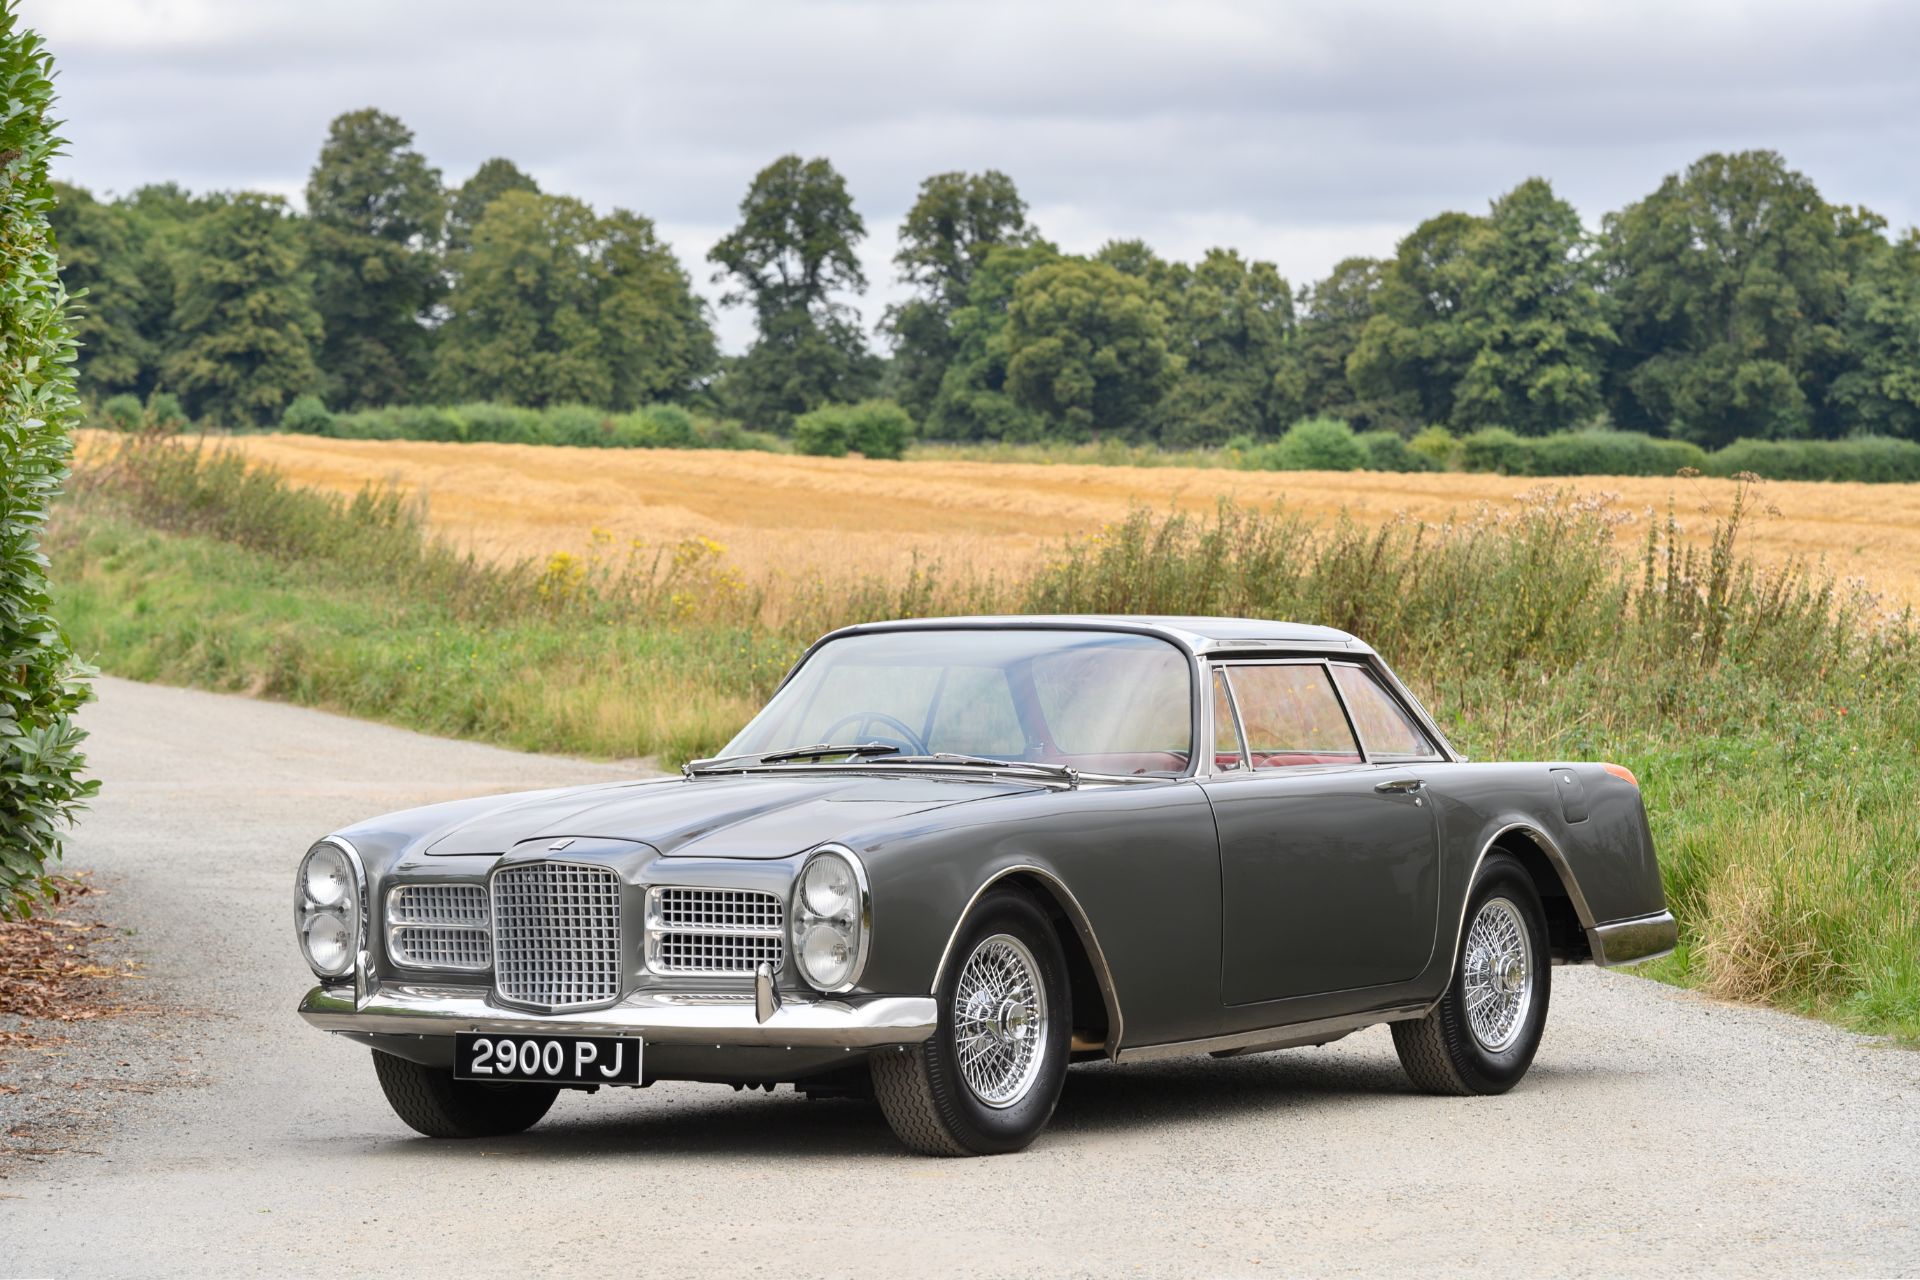 The 1963 London Motor Show,1963 Facel Vega Facel II Coup&#233; Chassis no. HK2 A172